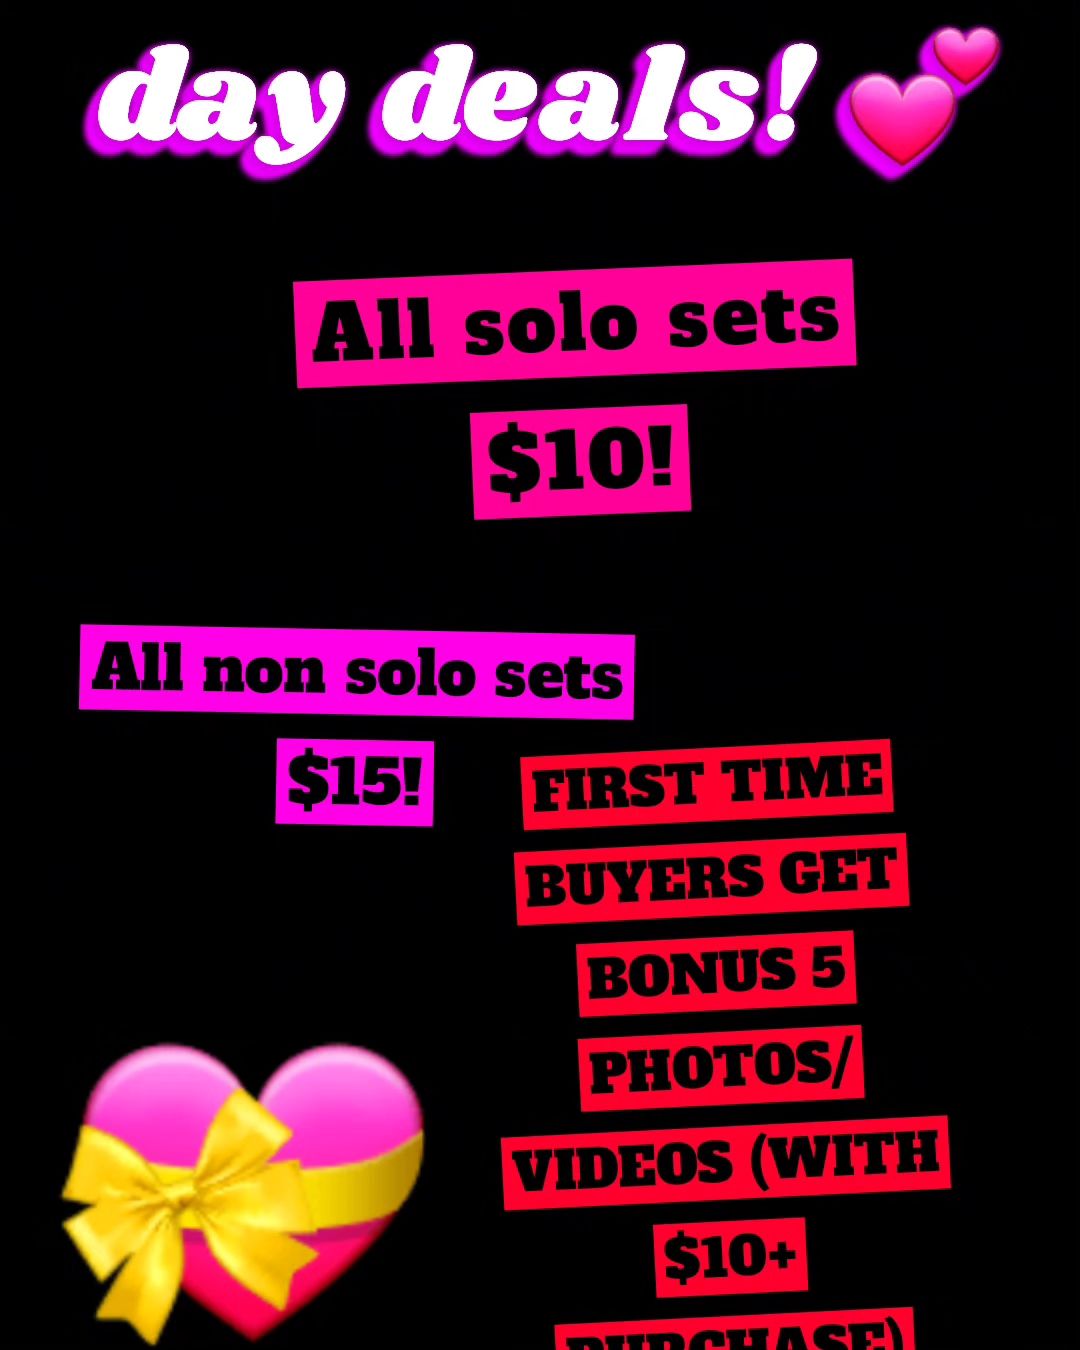 Valentines day deals! Add my snap 😜 #valentinesday #nsfw #chubby #thick #photos #videos #deals #snapchat